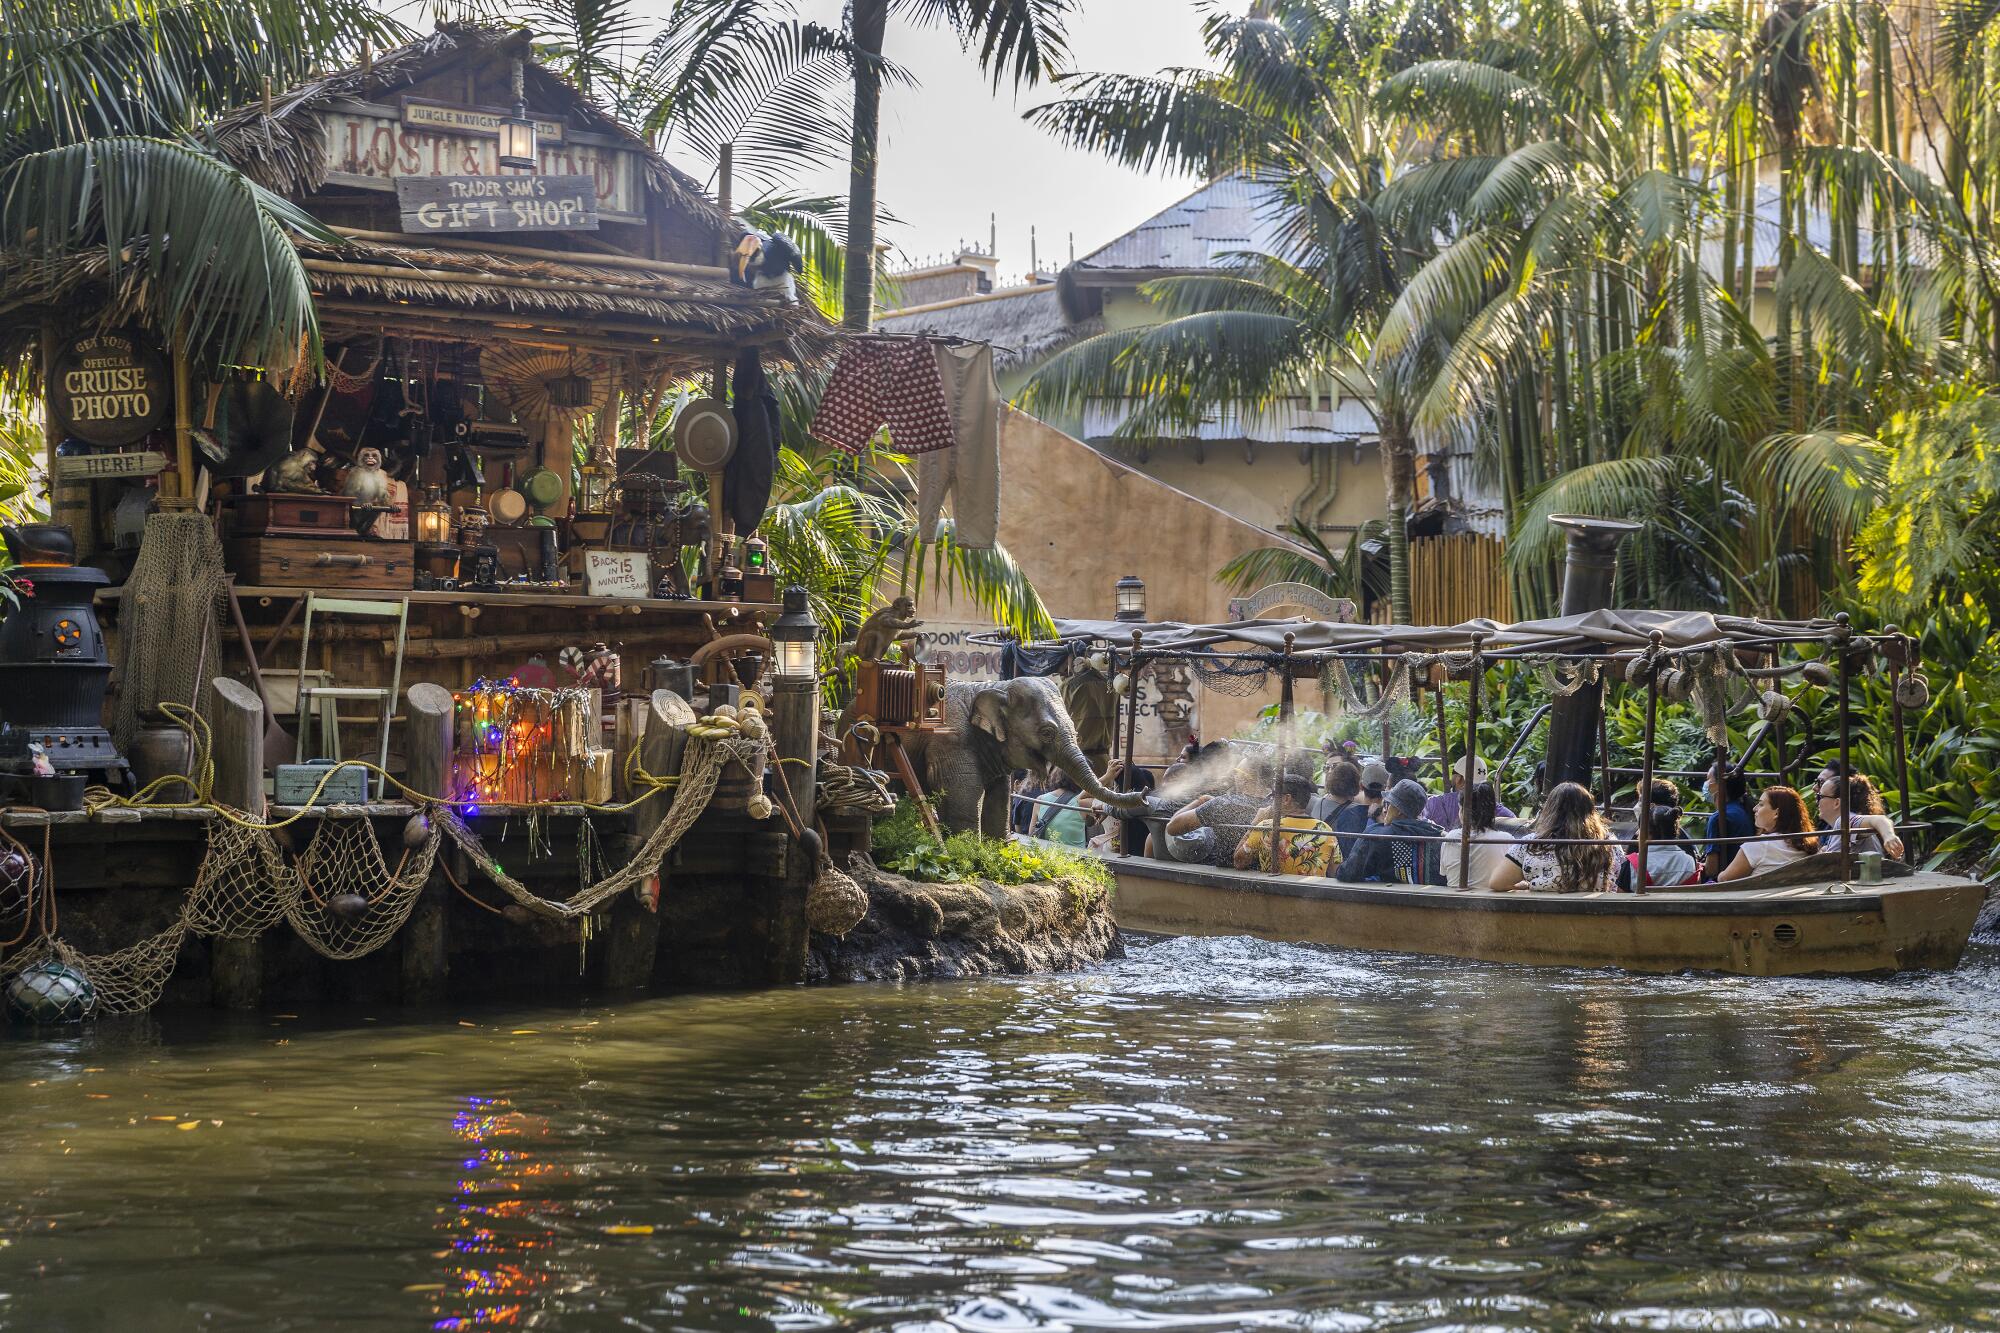 A baby elephant sprays water at a Jungle Cruise boat as they pass by Trader Sam's Gift Shop